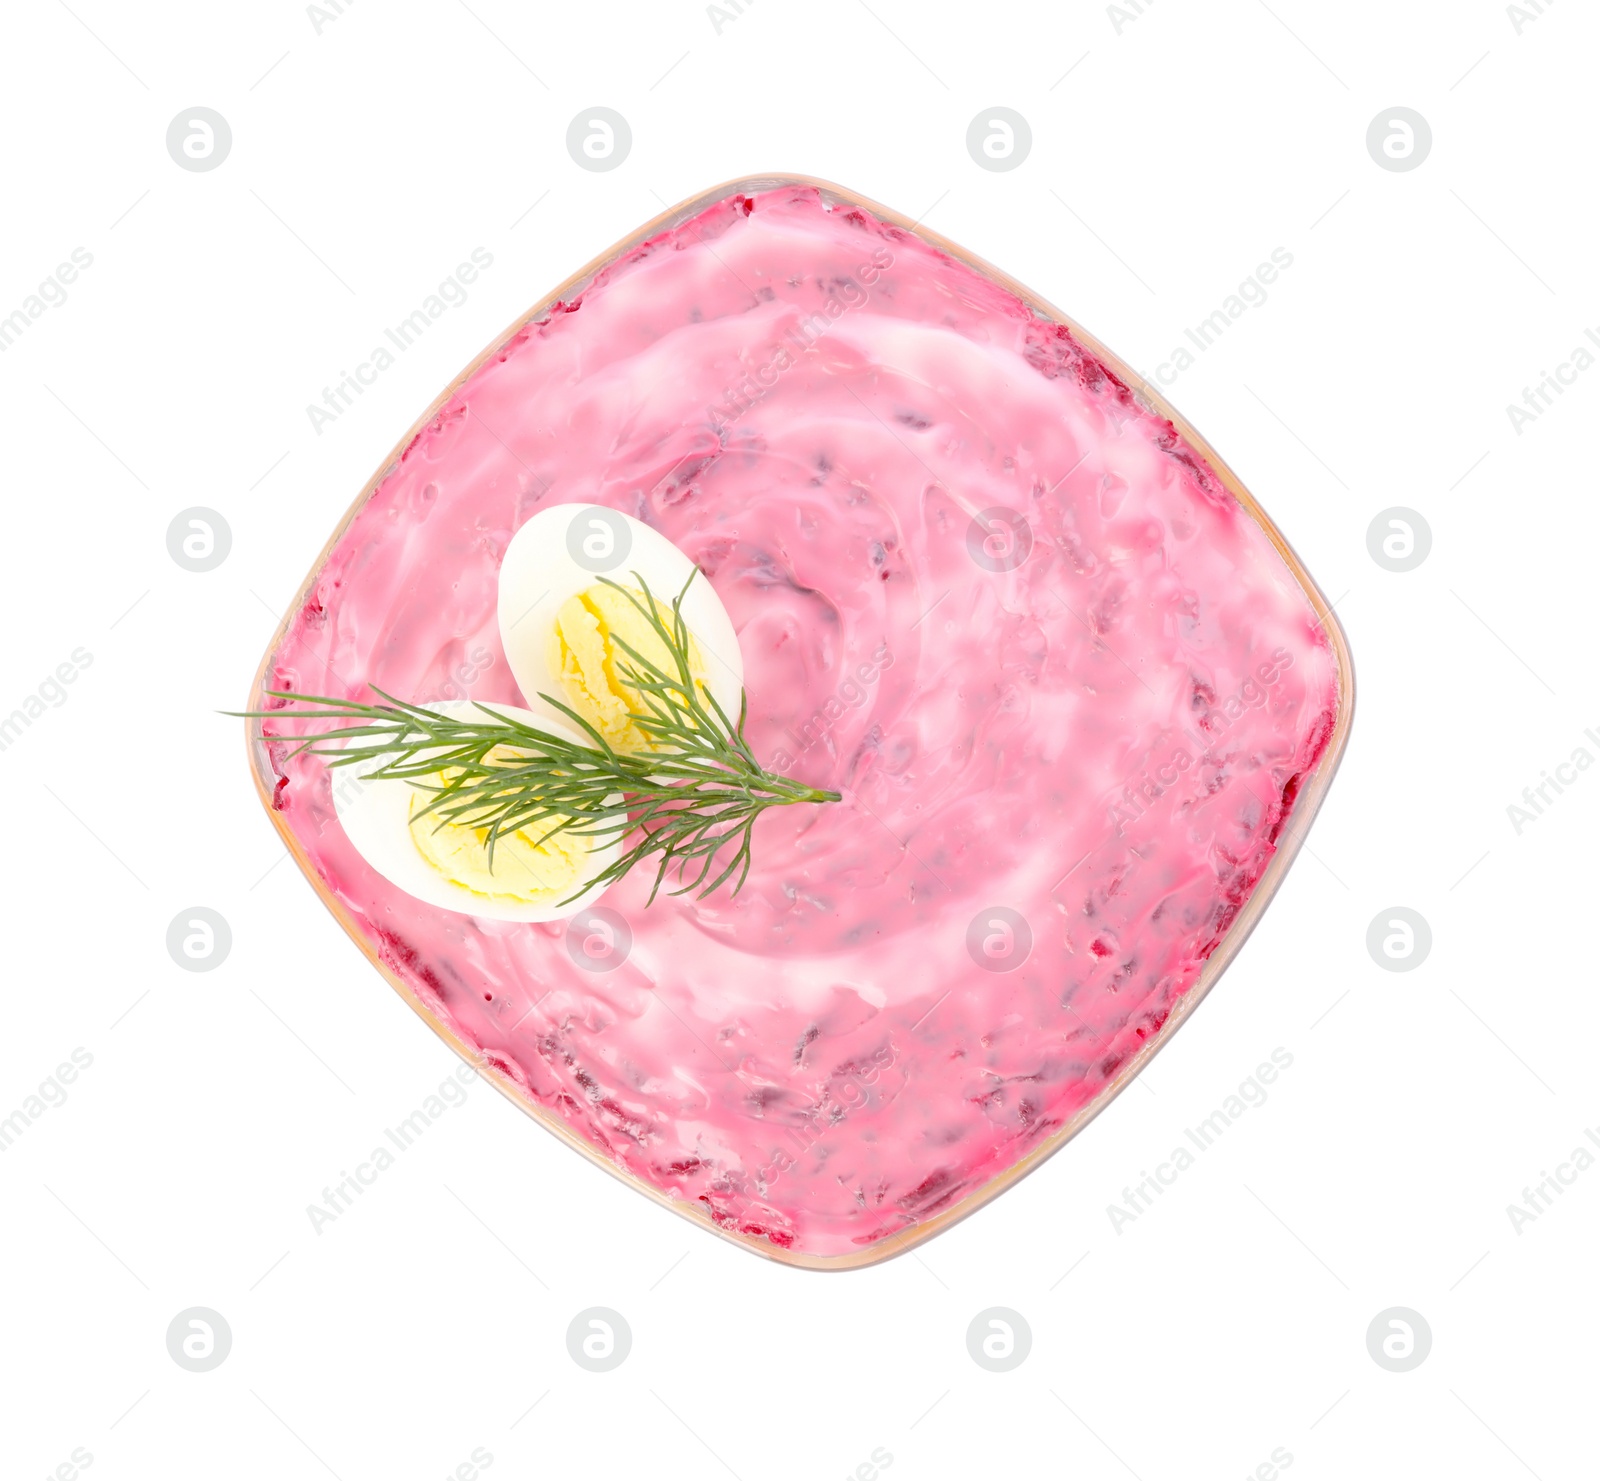 Photo of Herring under fur coat isolated on white, top view. Traditional Russian salad